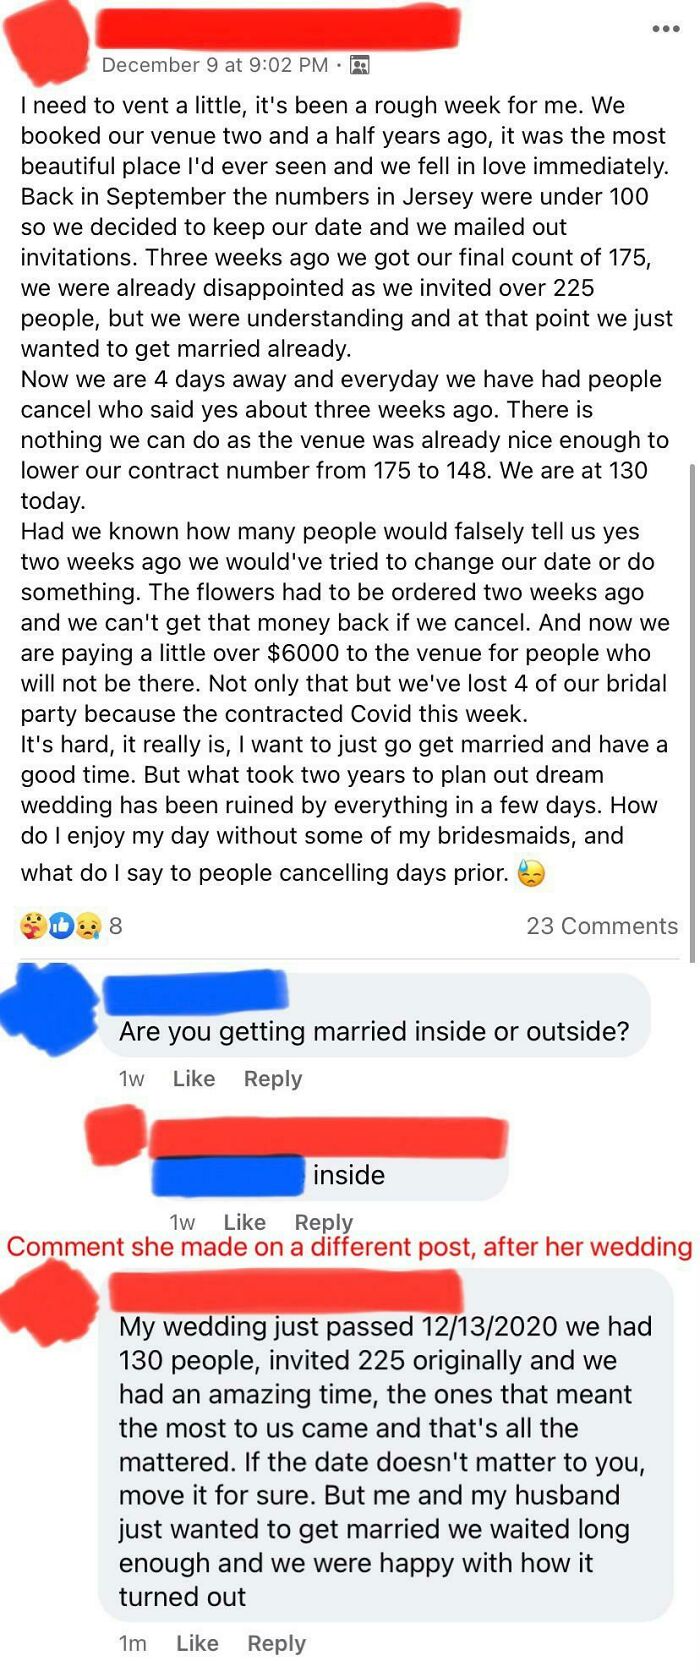 Bride Is Upset At Last Minute Cancellations For Her Indoor Wedding, Plus Four Of Her Bridal Party Contracted Covid The Week Of